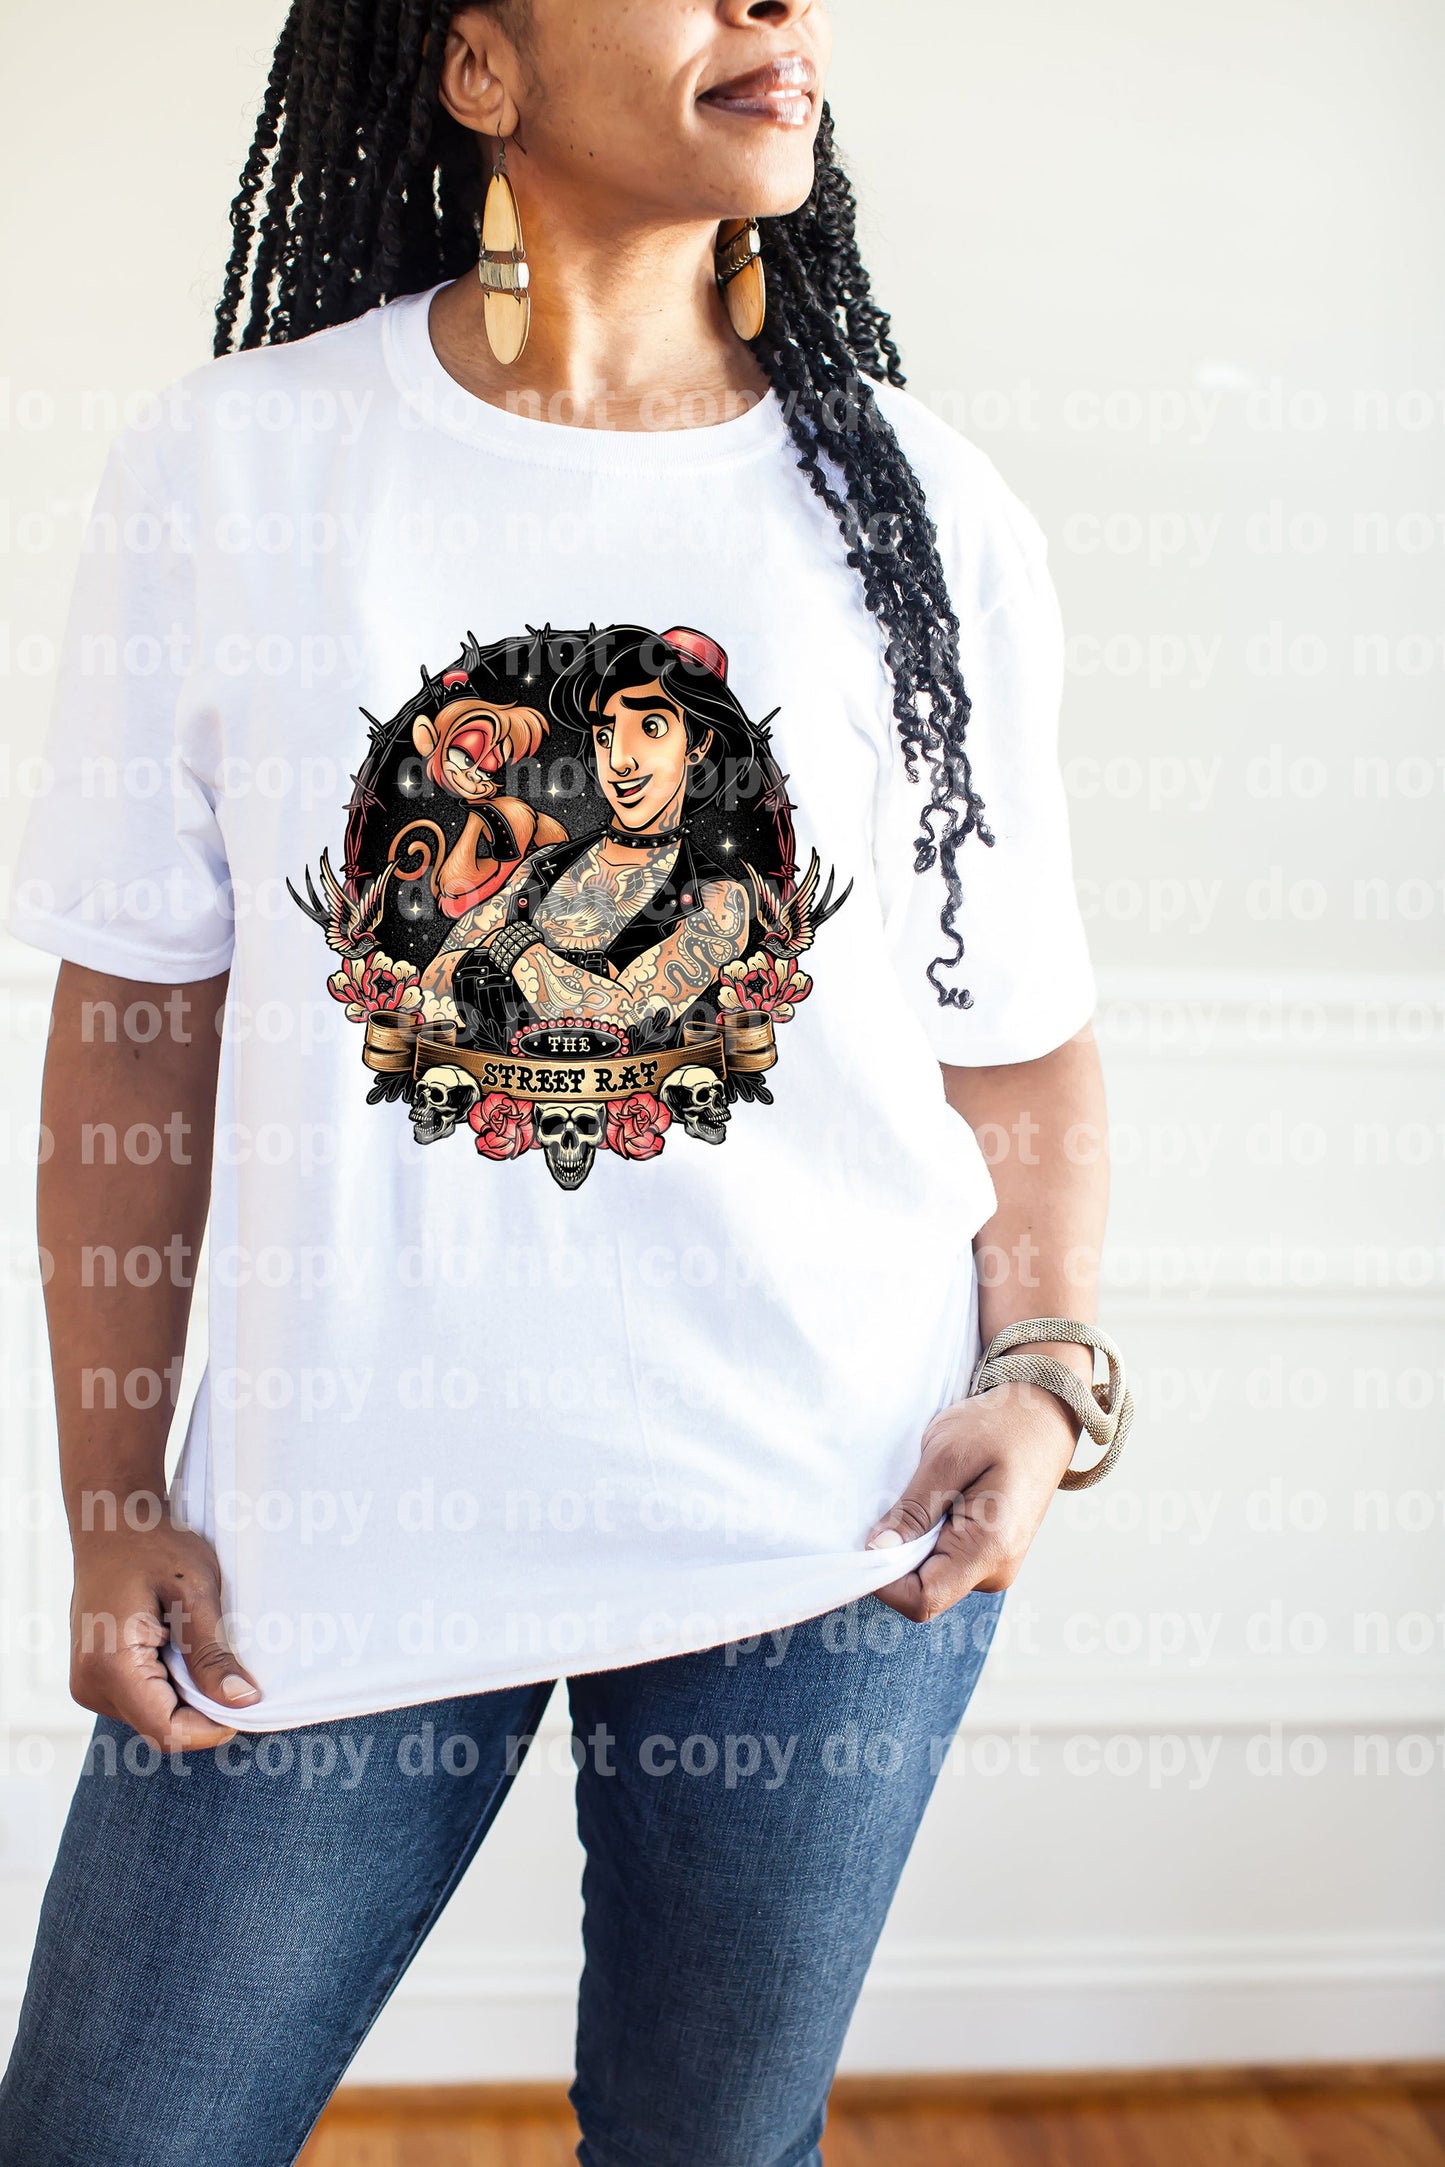 The Street Rat Dream Print or Sublimation Print